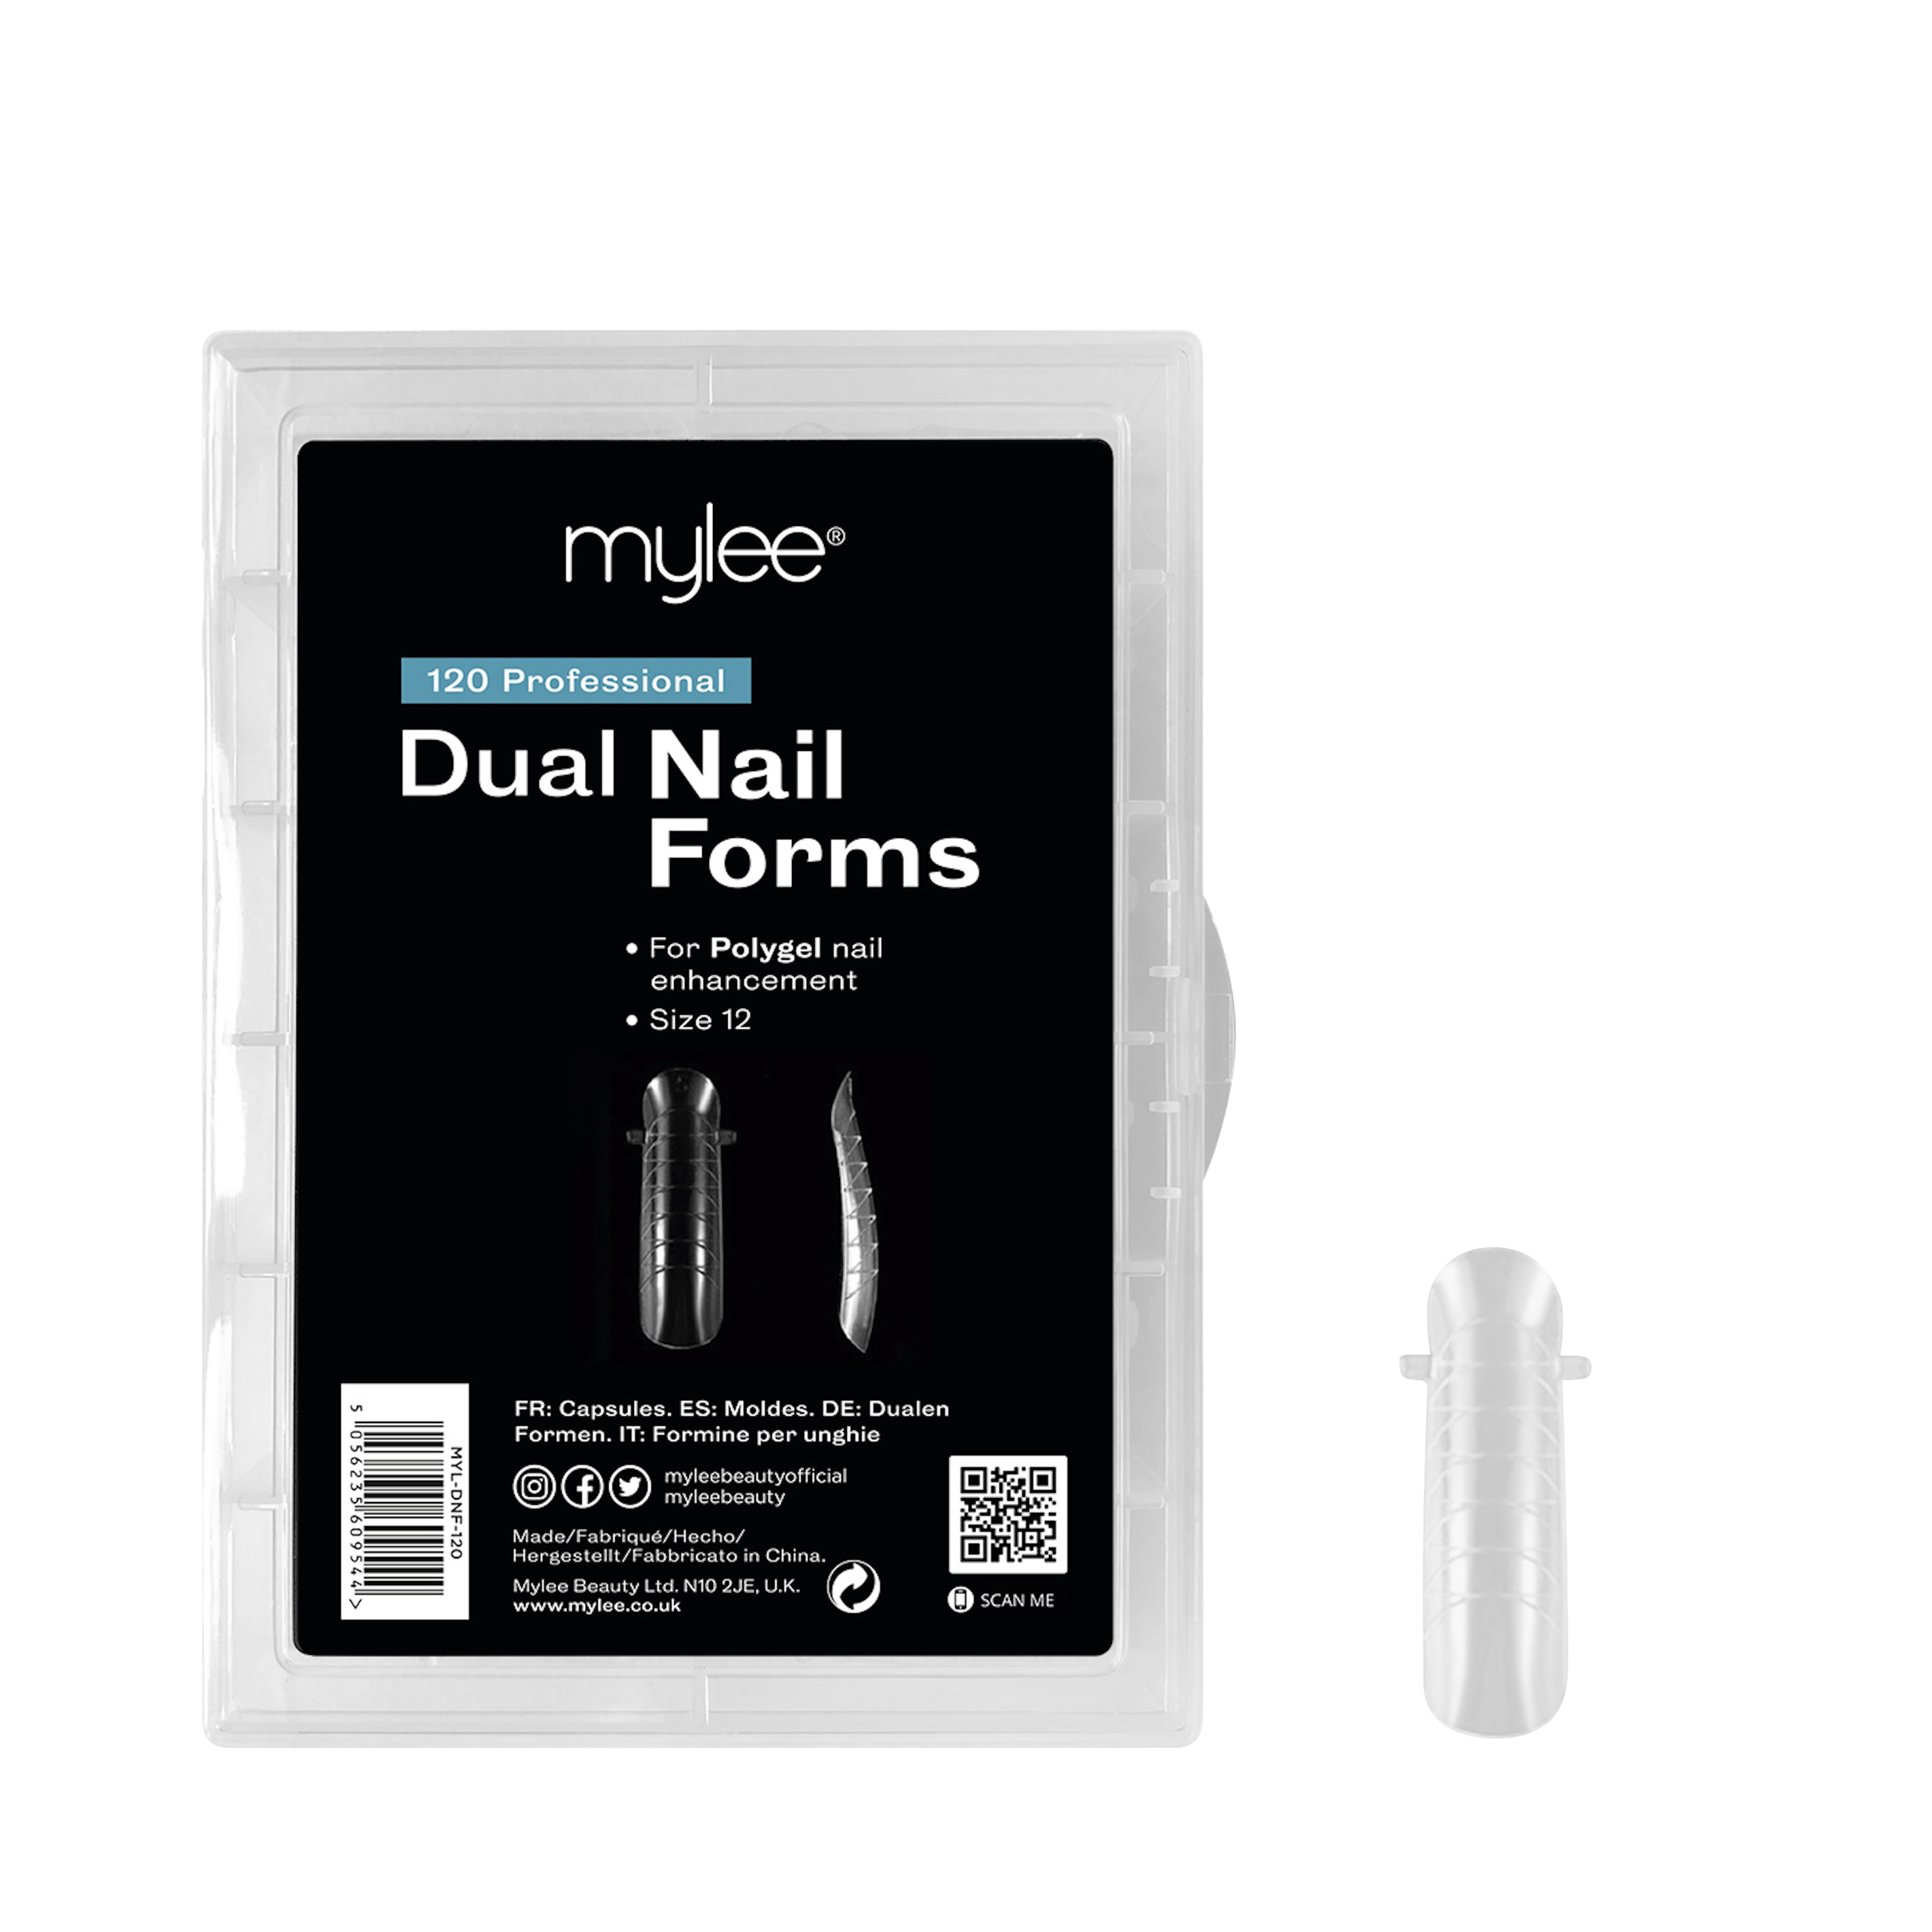 mylee dual nail forms